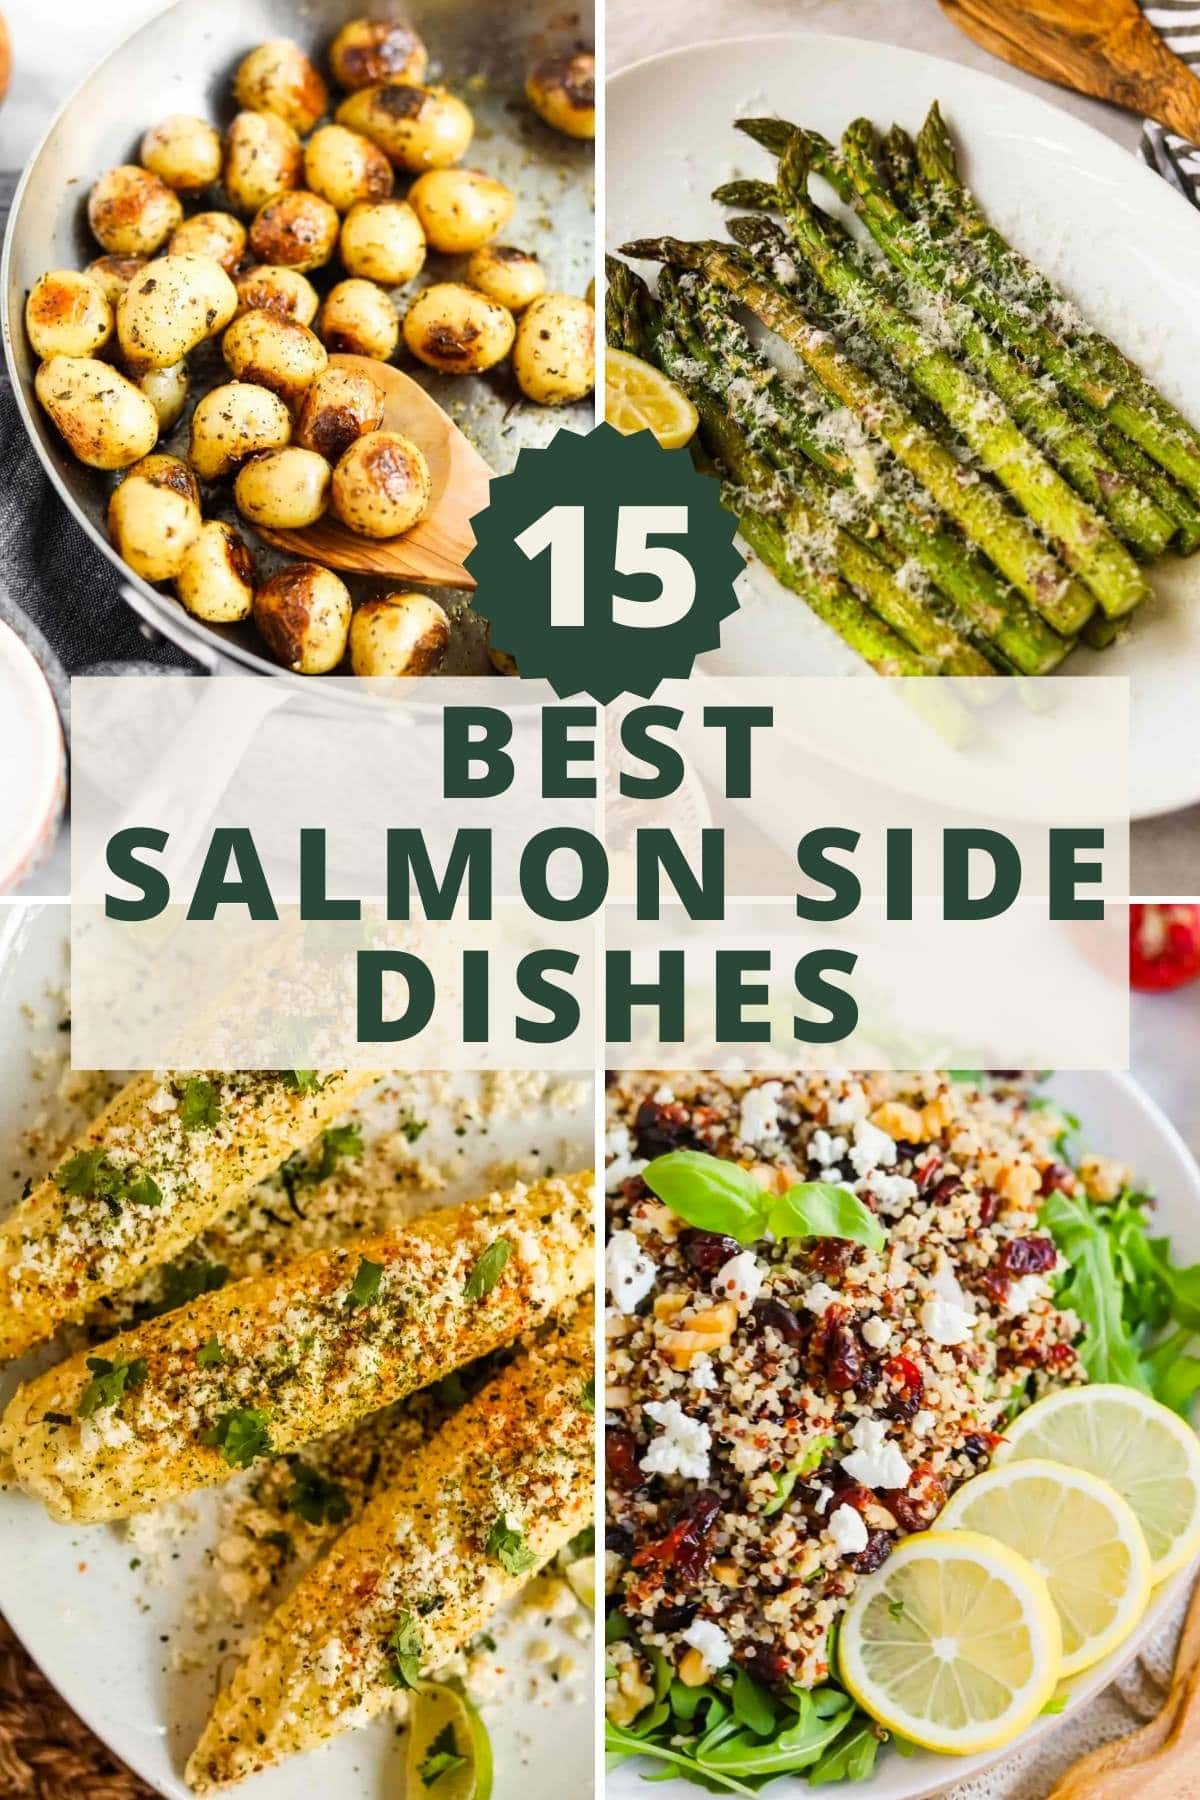 The best side dishes to serve with salmon, including asparagus, corn, quinoa arugula salad, and roasted potatoes.